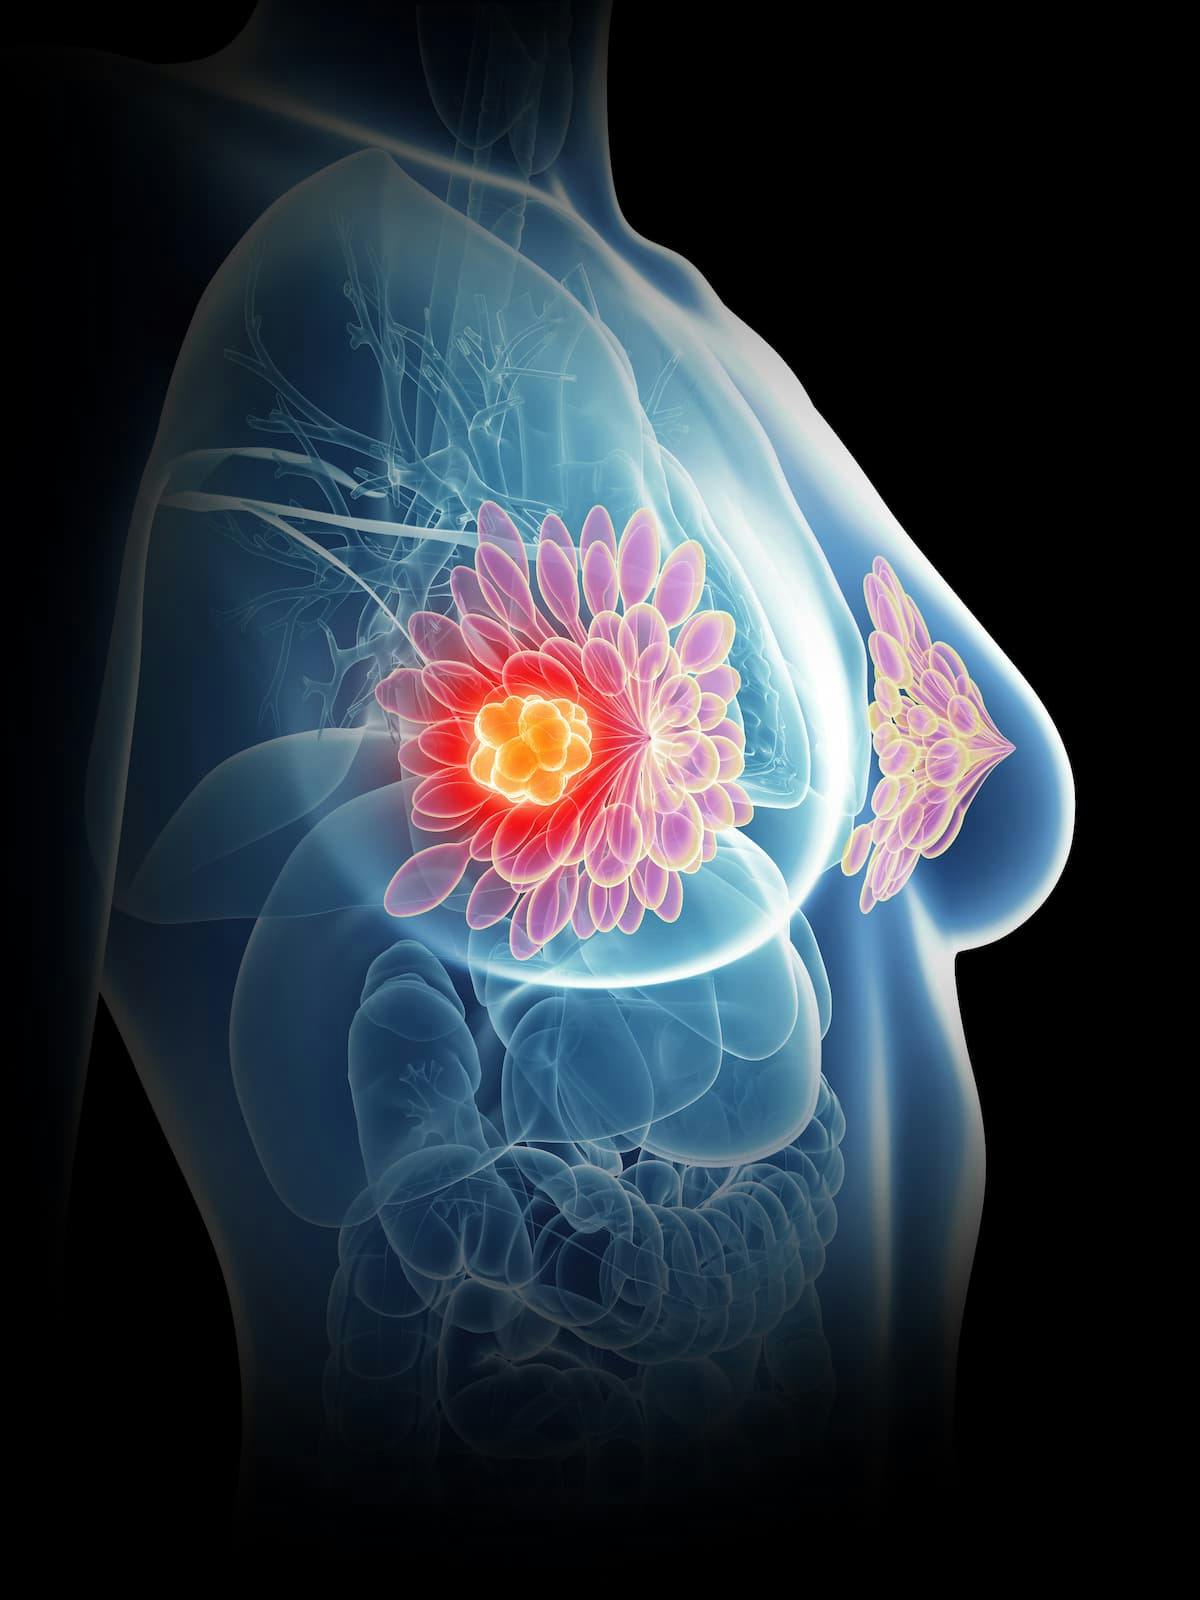 Results from a post-hoc subgroup analysis of the phase 3 TROPiCS-02 study indicated that sacituzumab govitecan improved efficacy outcomes vs physician’s choice of treatment in HER2-low and HER2 immunohistochemistry 0, hormone receptor–positive metastatic breast cancer. 